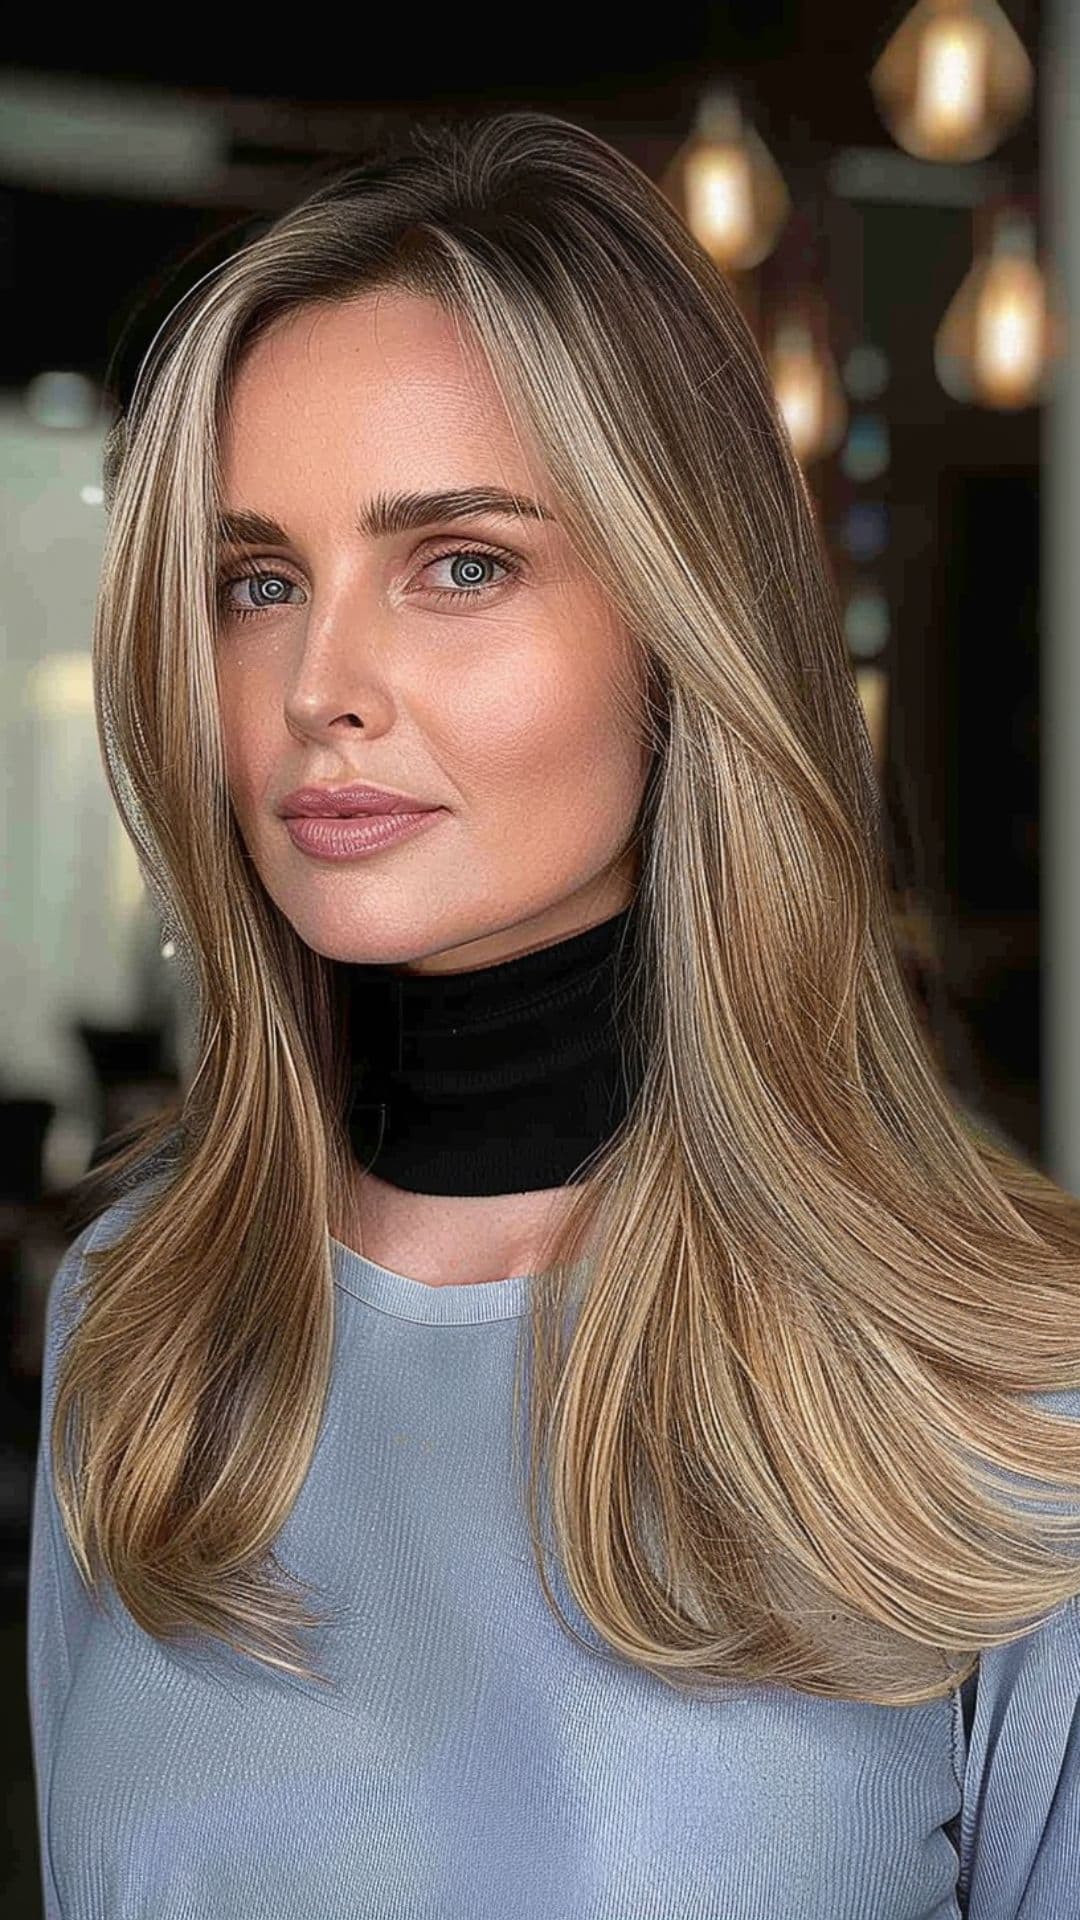 A woman modelling a classic straight hair with side part hairstyle.